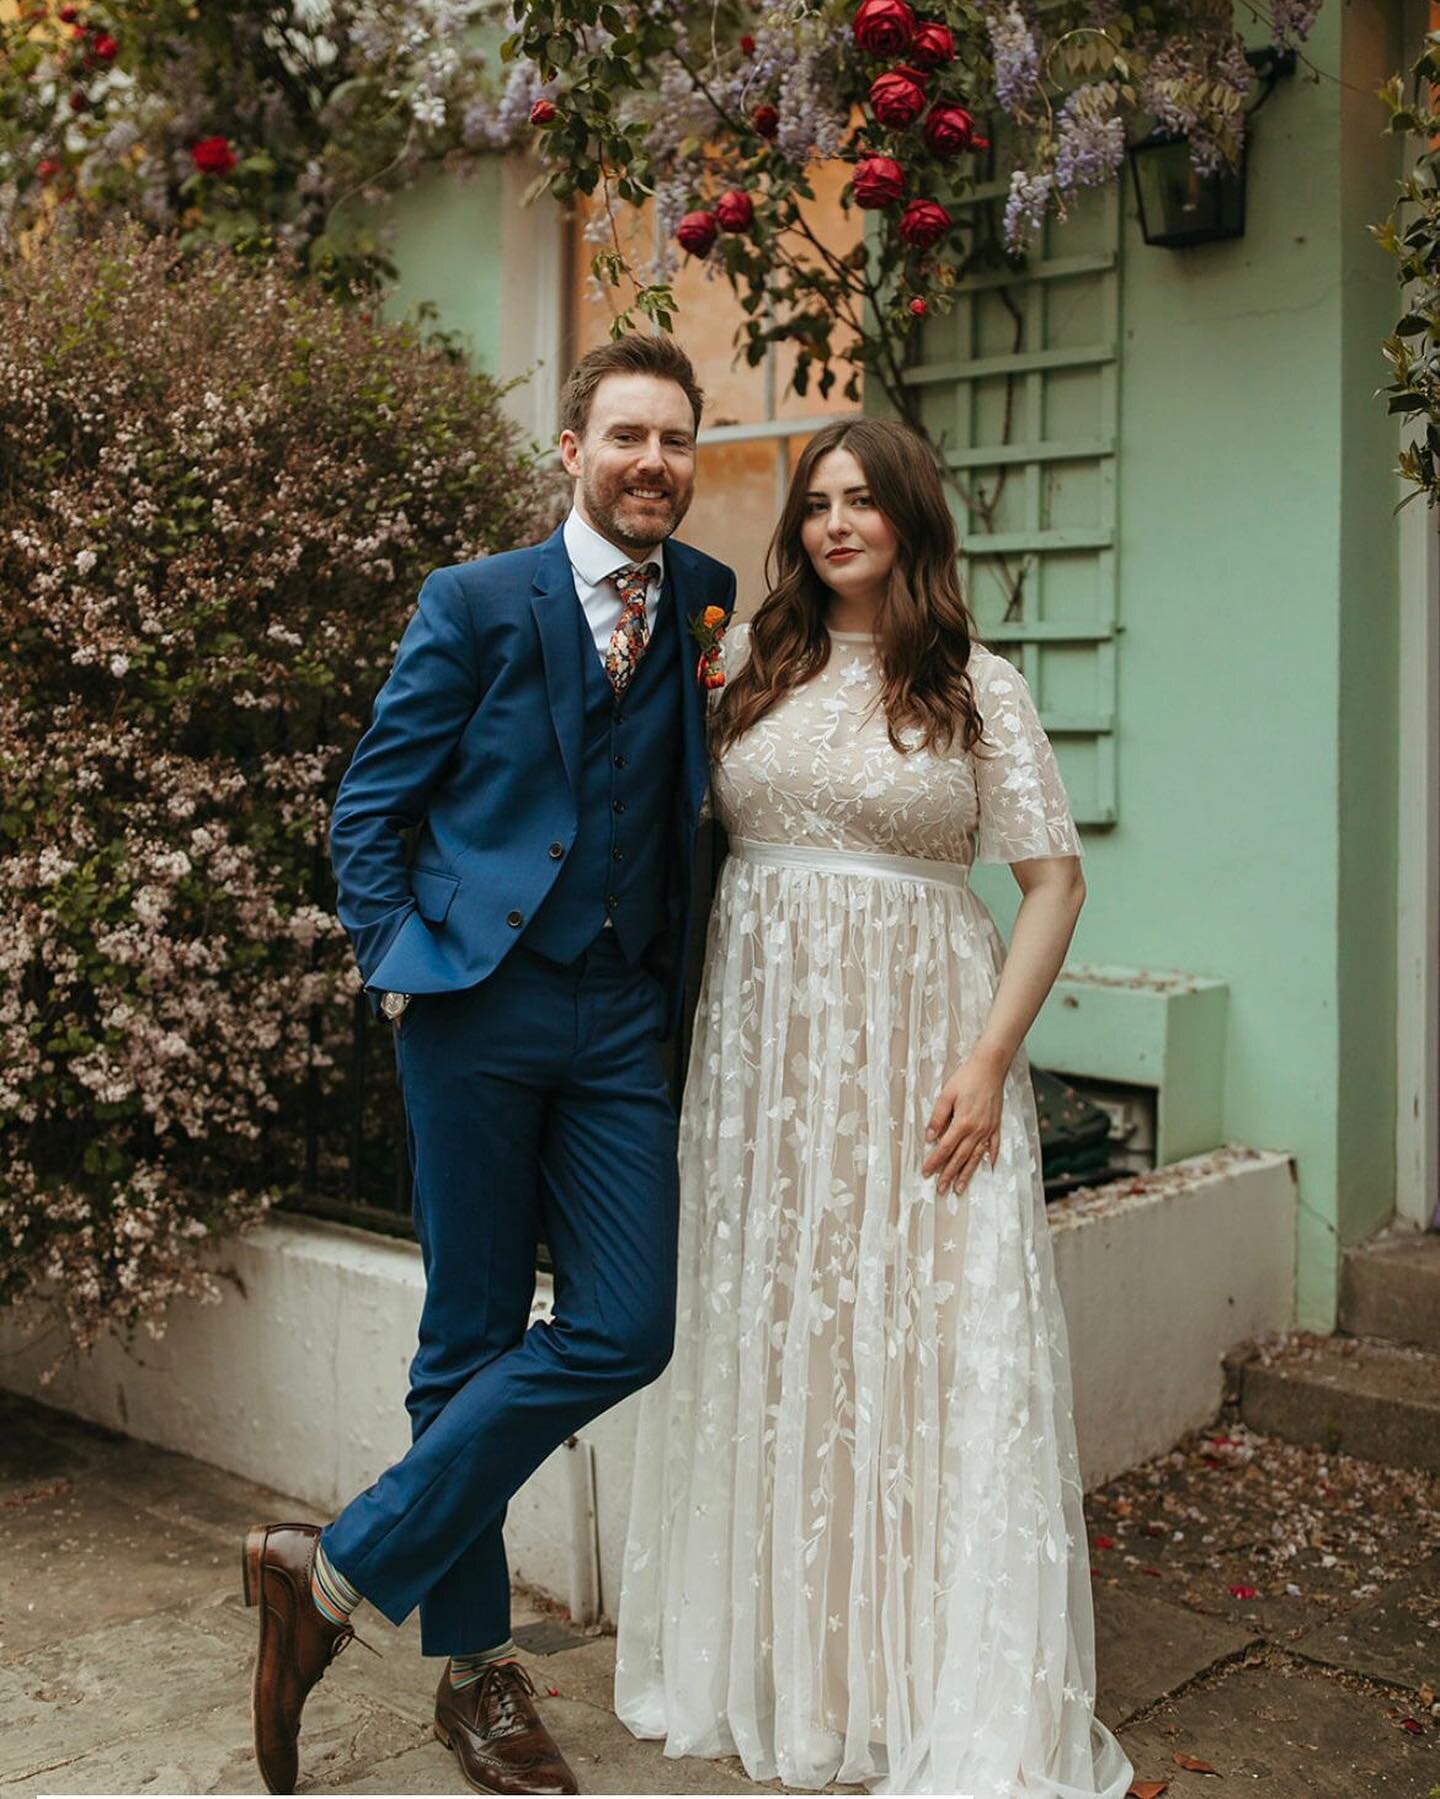 Excuse us, but&hellip;okay wow ✨ a round of applause for our gorgeous, gorgeous couple from this past weekend. A few wedding dates later and we got &lsquo;em hitched 👌

📷 @albaturnbull 
📝 @revelryeventsuk 
💇&zwj;♀️ @hairbyfay 
💄 @liliamullingerb